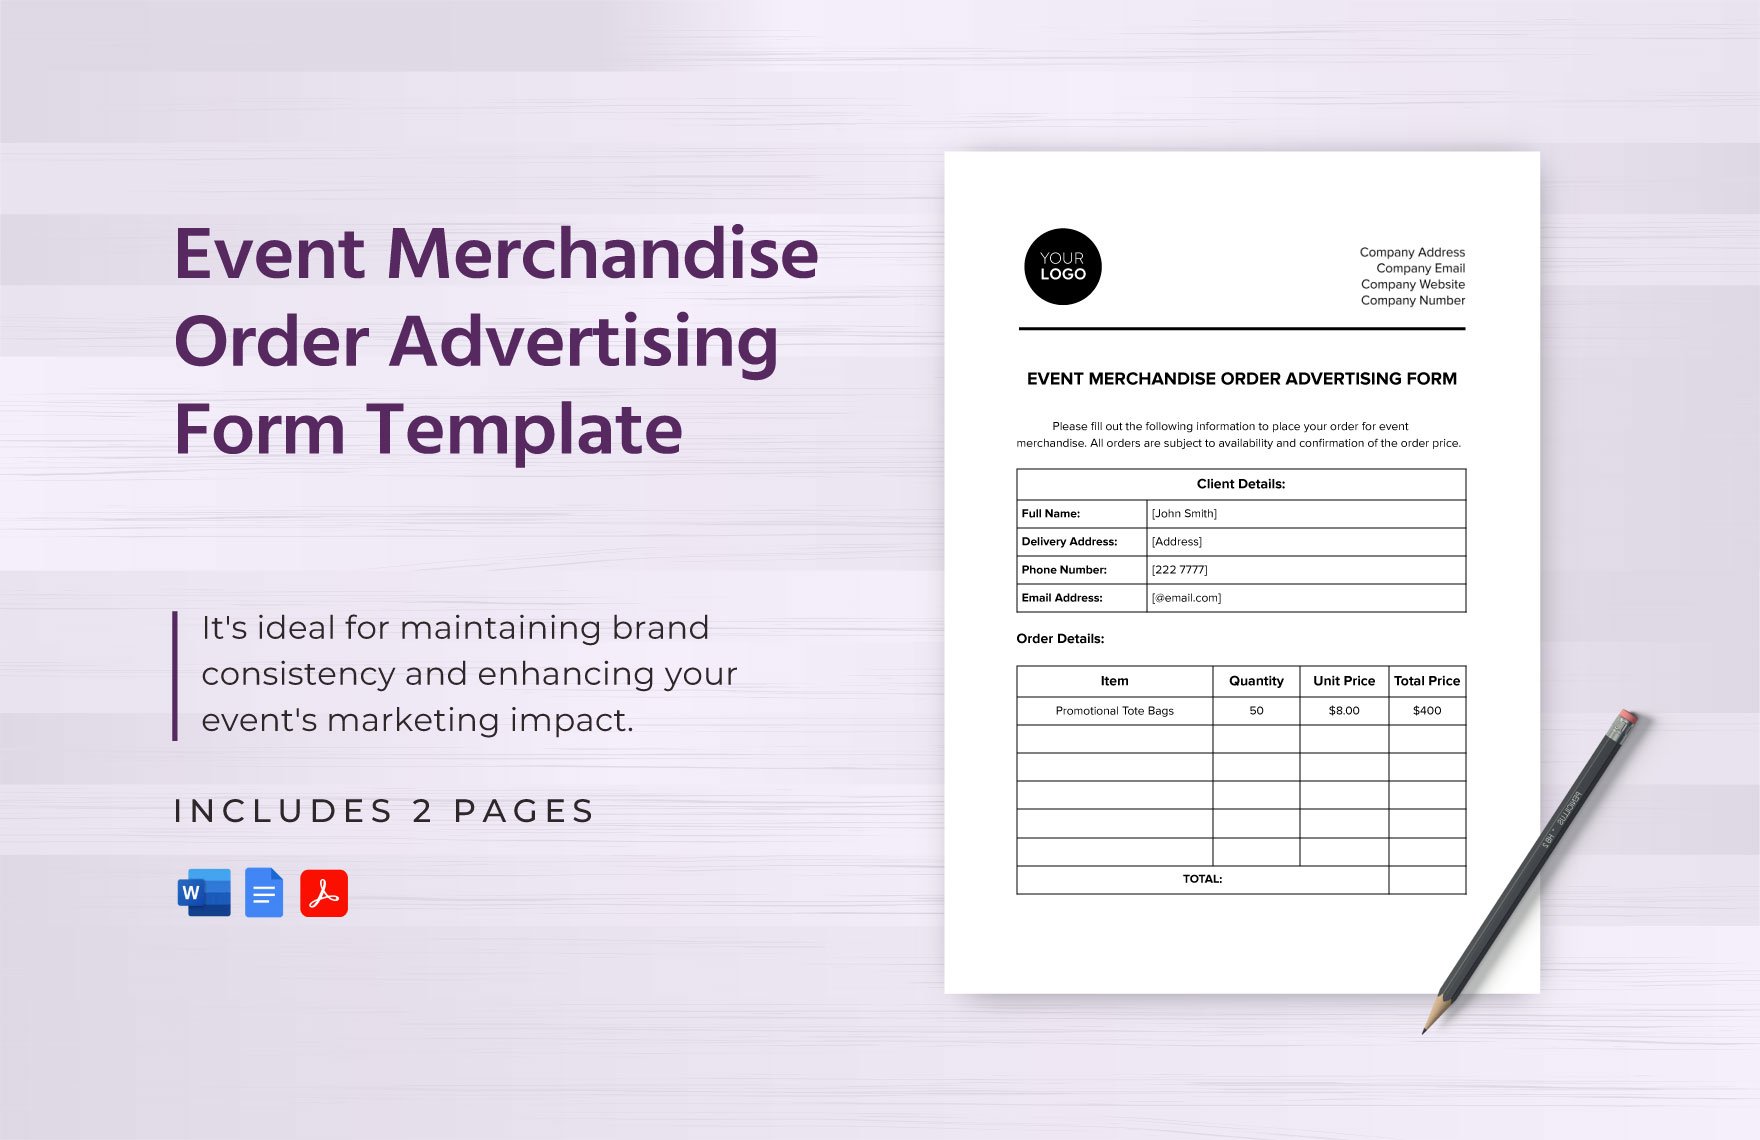 Event Merchandise Order Advertising Form Template in Word, Google Docs, PDF